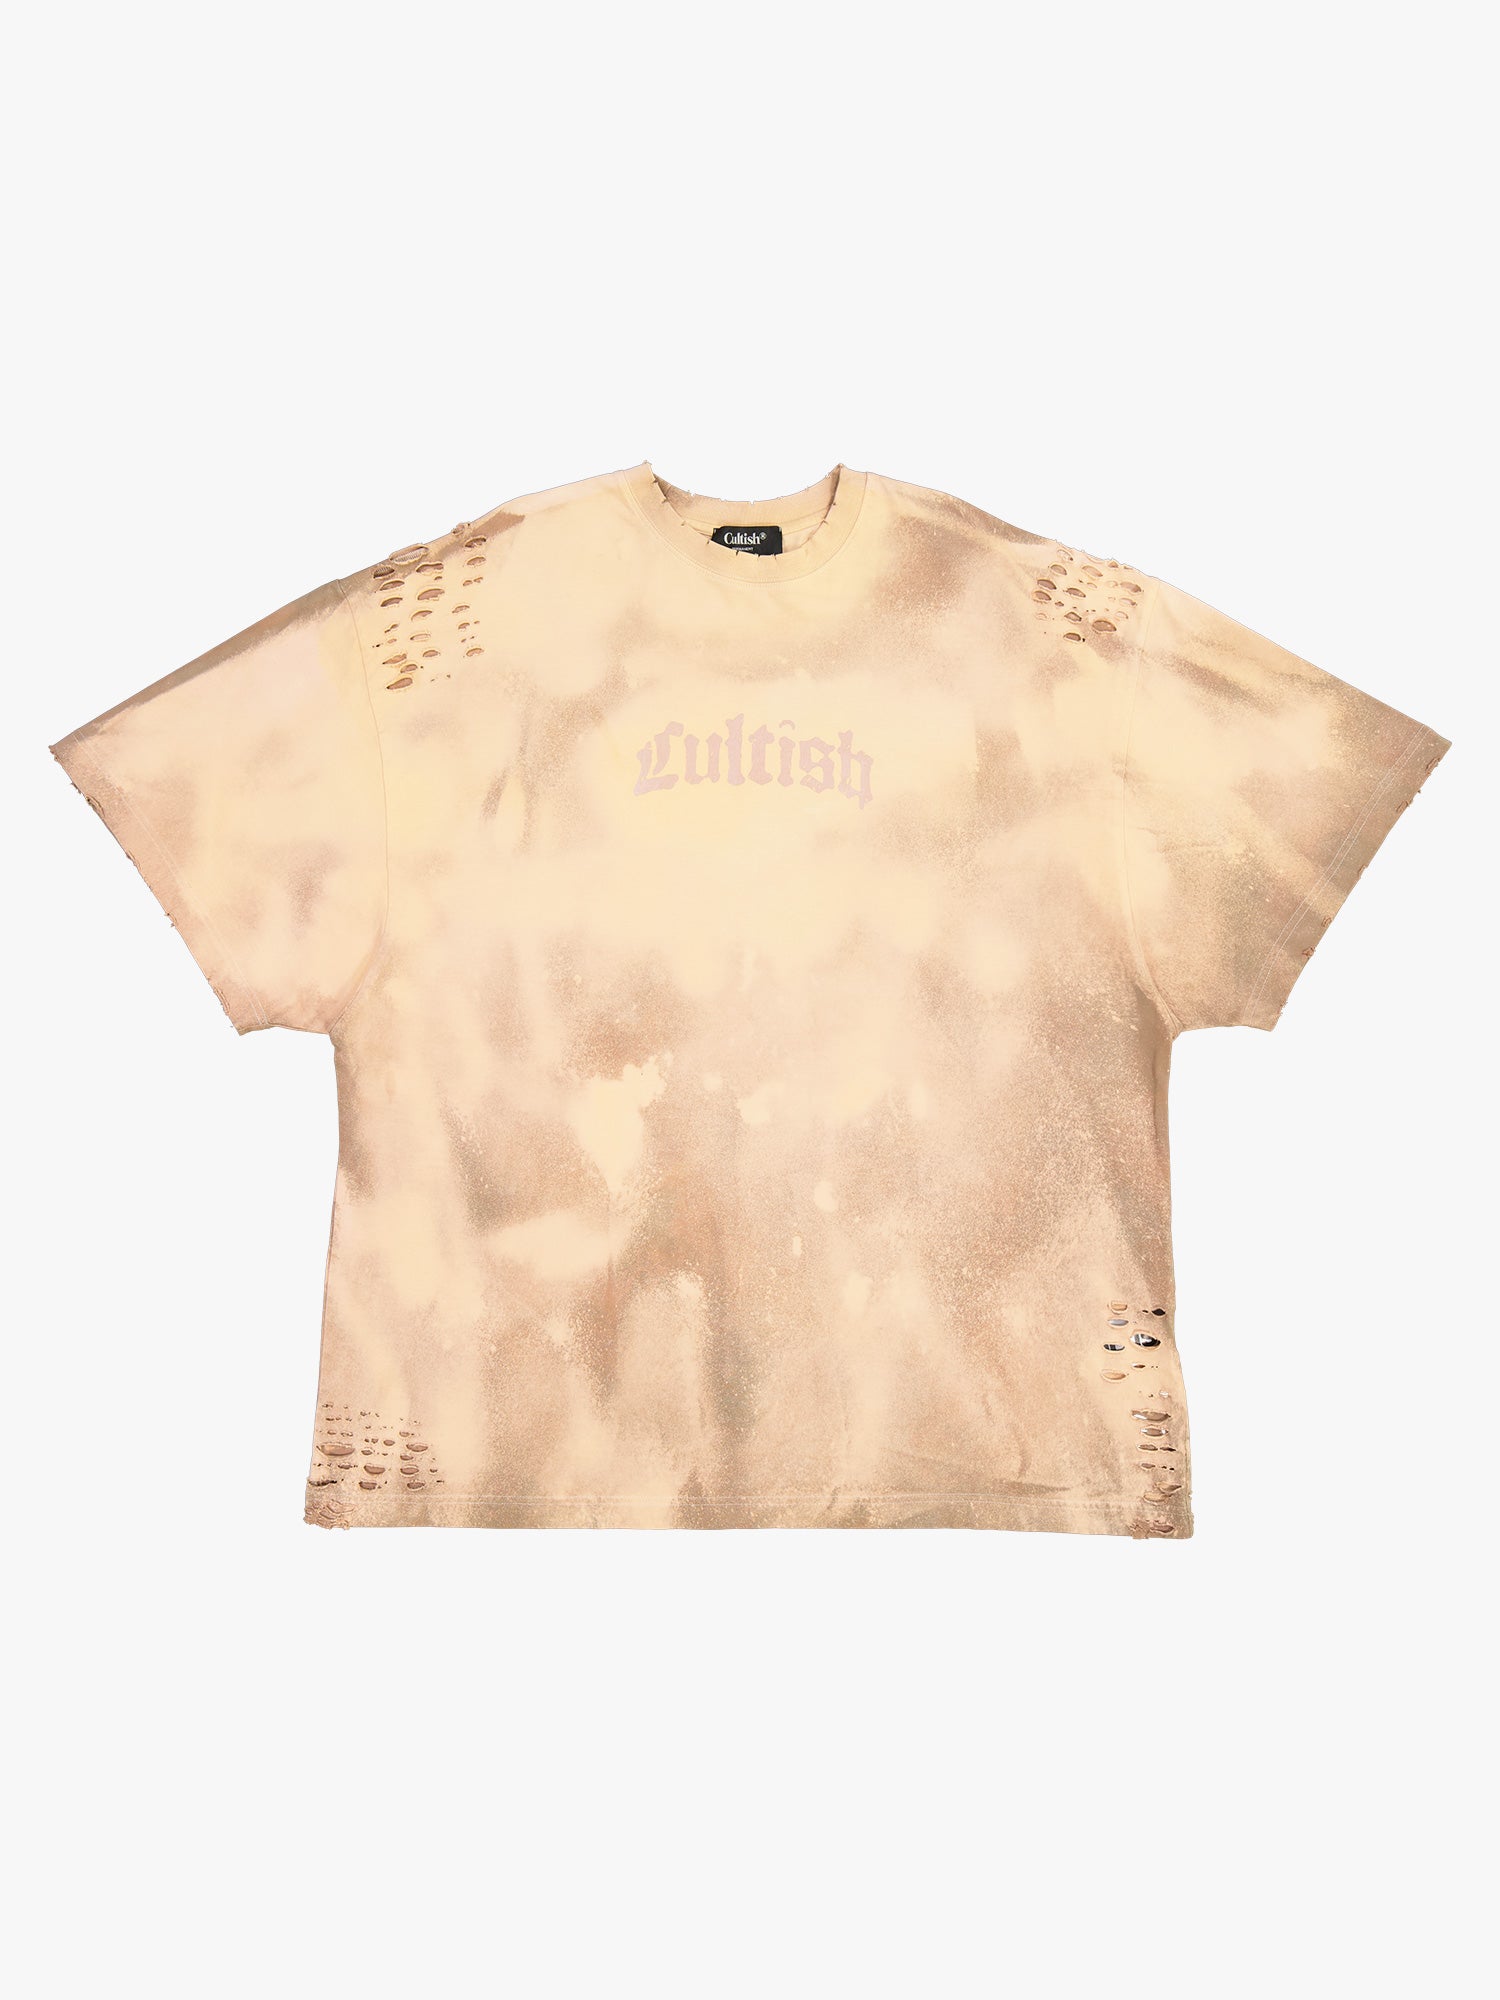 ⓔ Grotesque Oversized T-Shirt